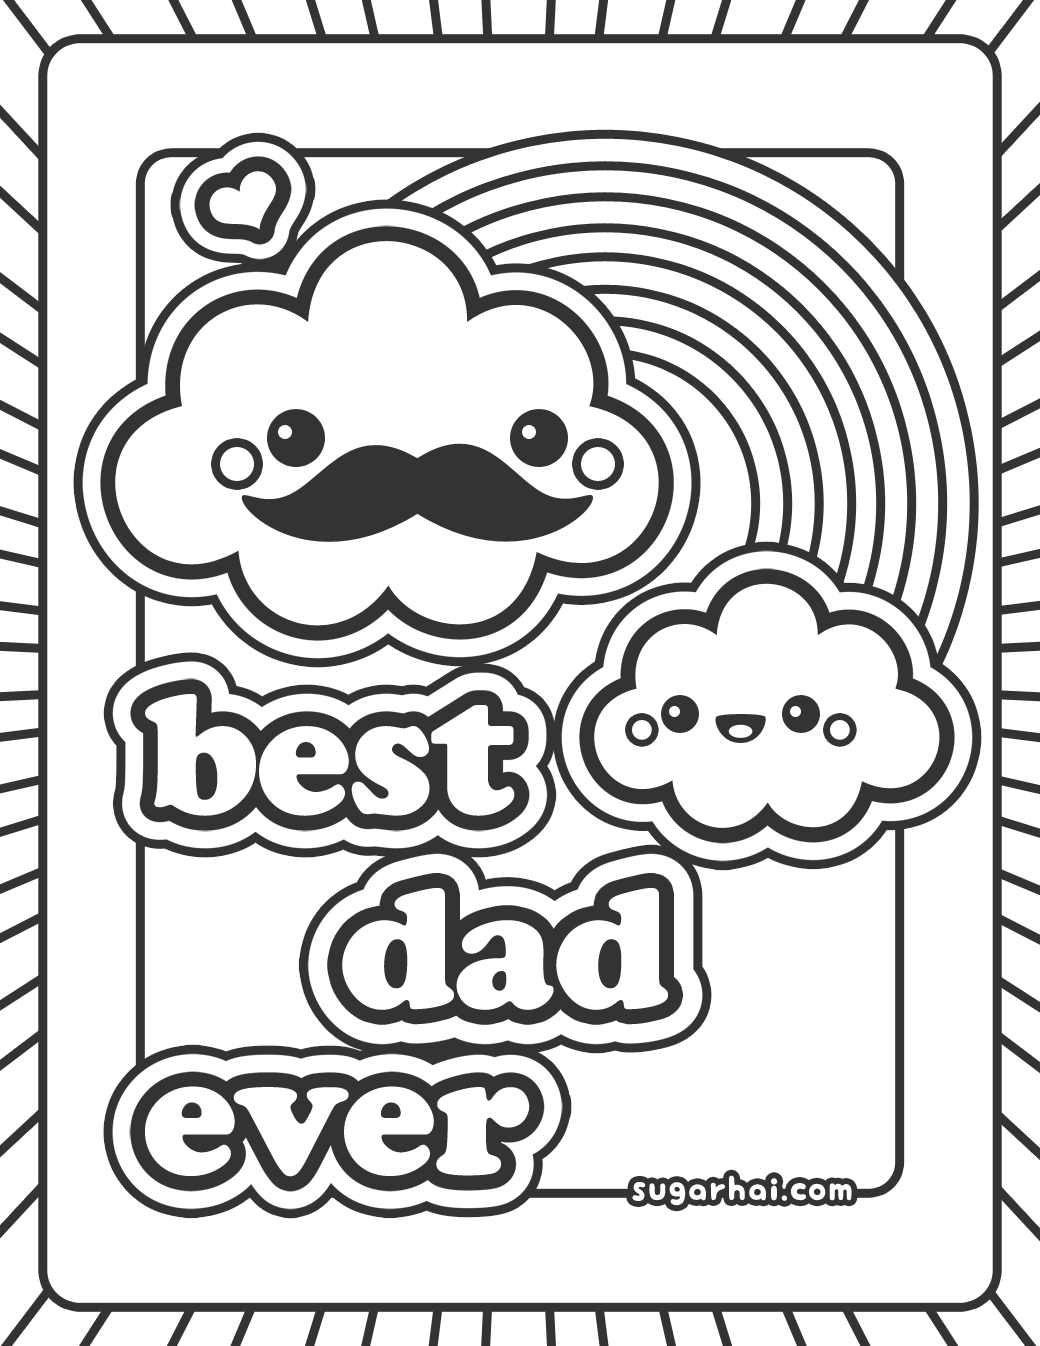 Happy Birthday Dad Coloring Pages at Free printable